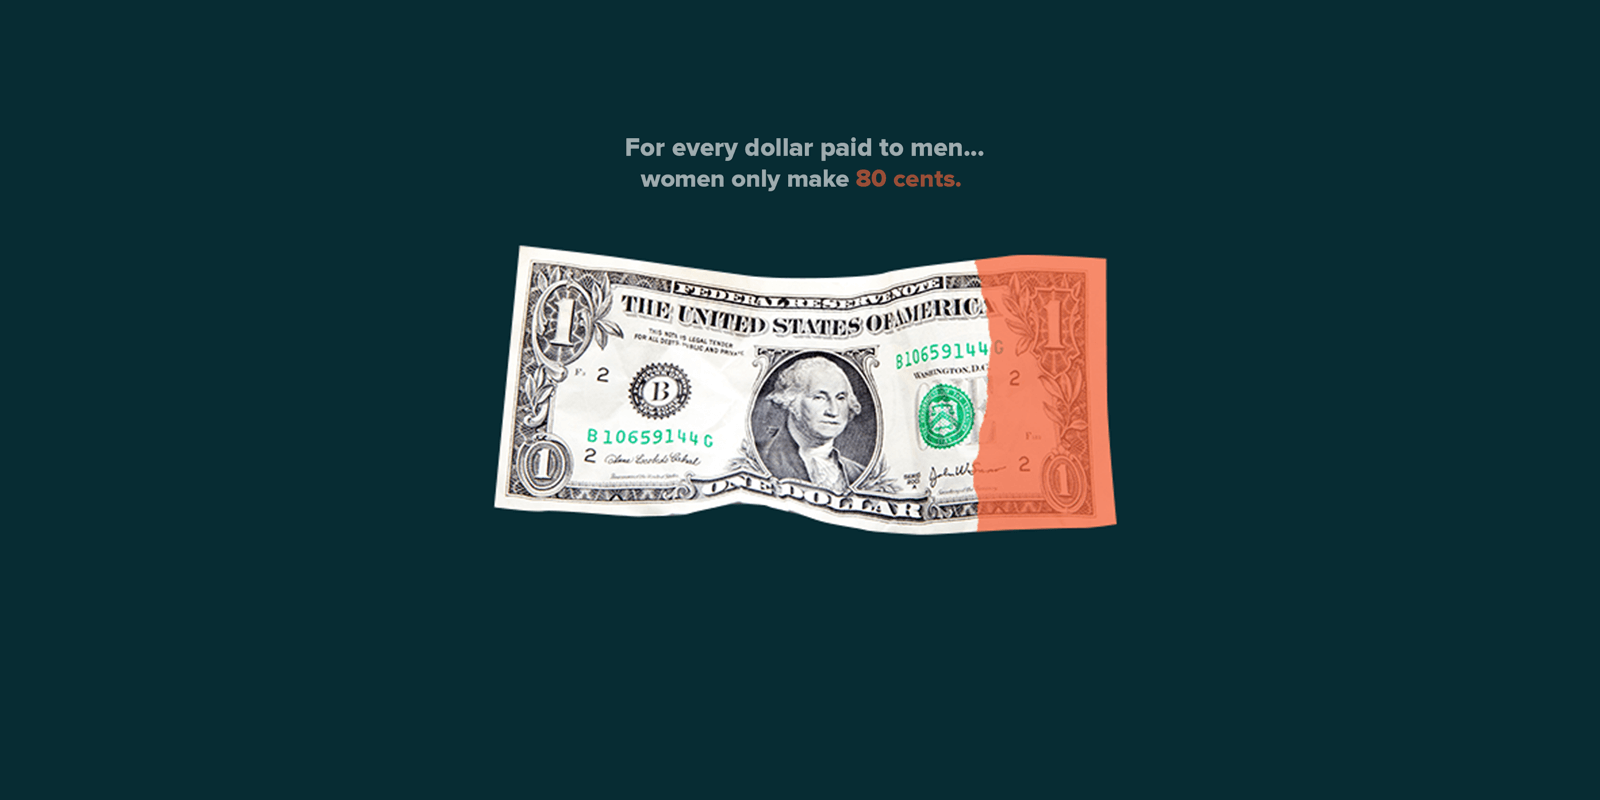 Dollar bill with part colored out